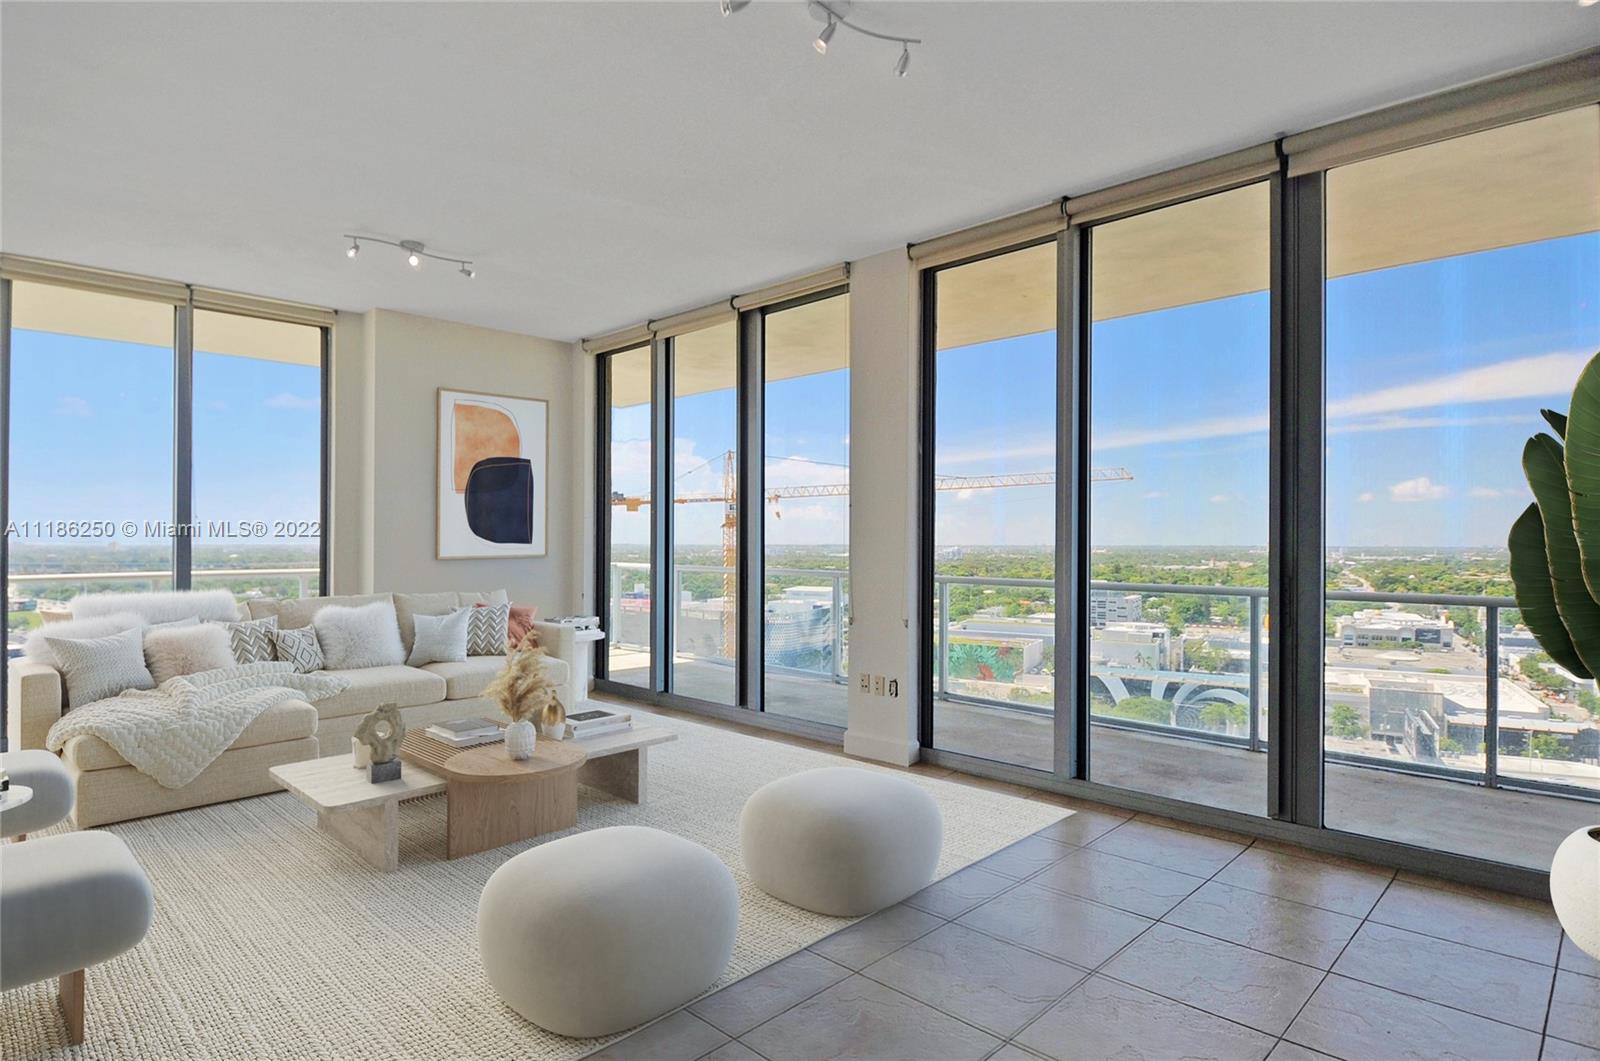 Breathtaking views of Biscayne Bay from this 3 bedroom residence featuring 10 Ft exposed concrete ce